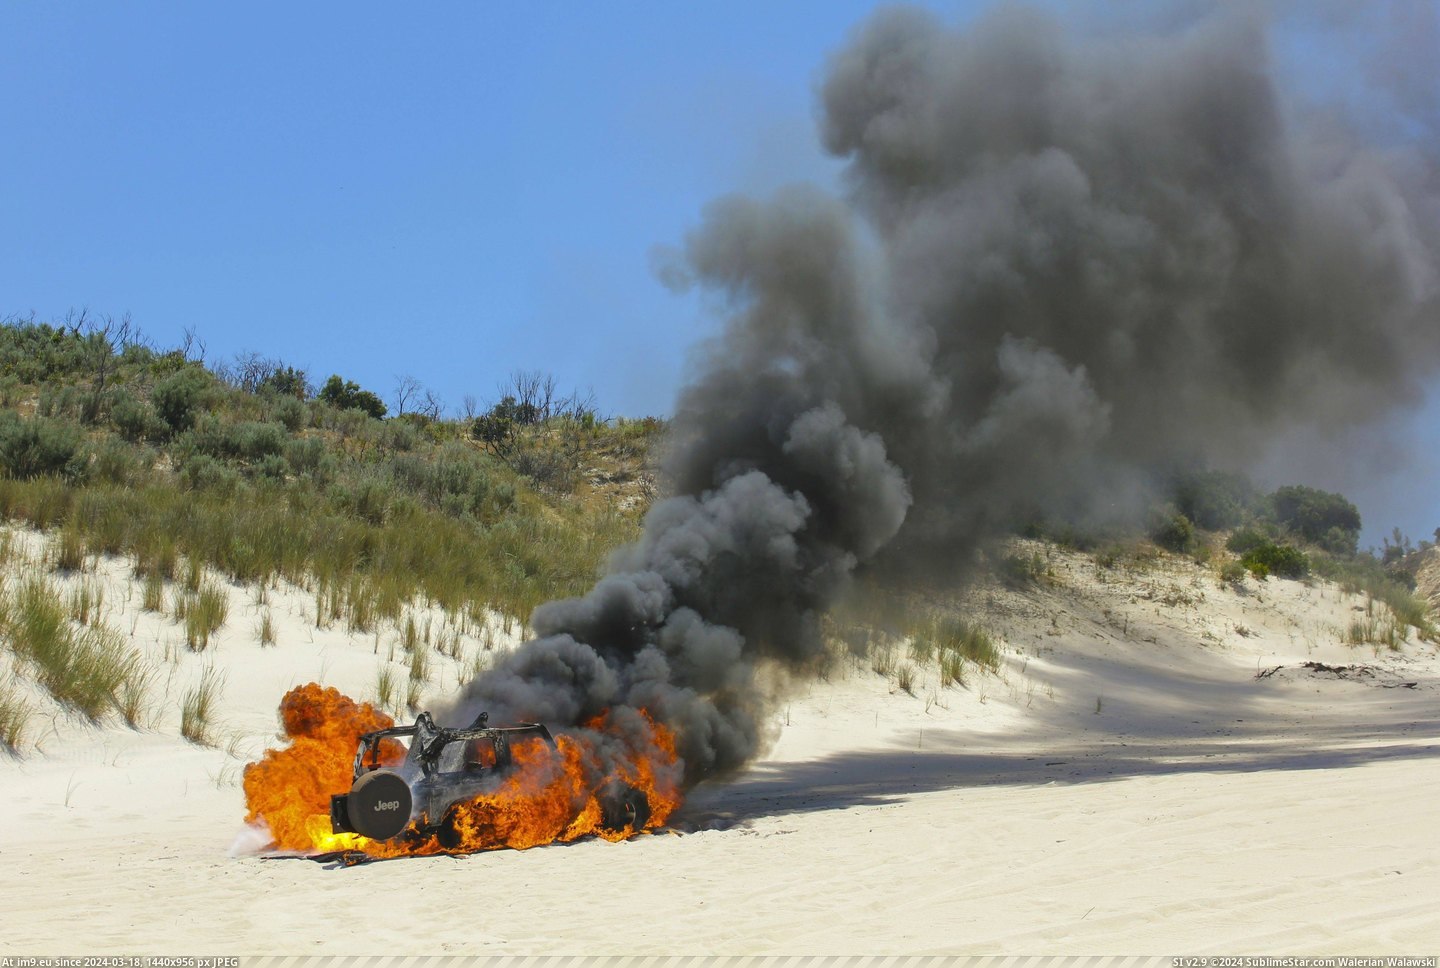 #Interested #Wrangler #Explodes #Jeep [Pics] Wrangler explodes, Jeep not interested 5 Pic. (Image of album My r/PICS favs))